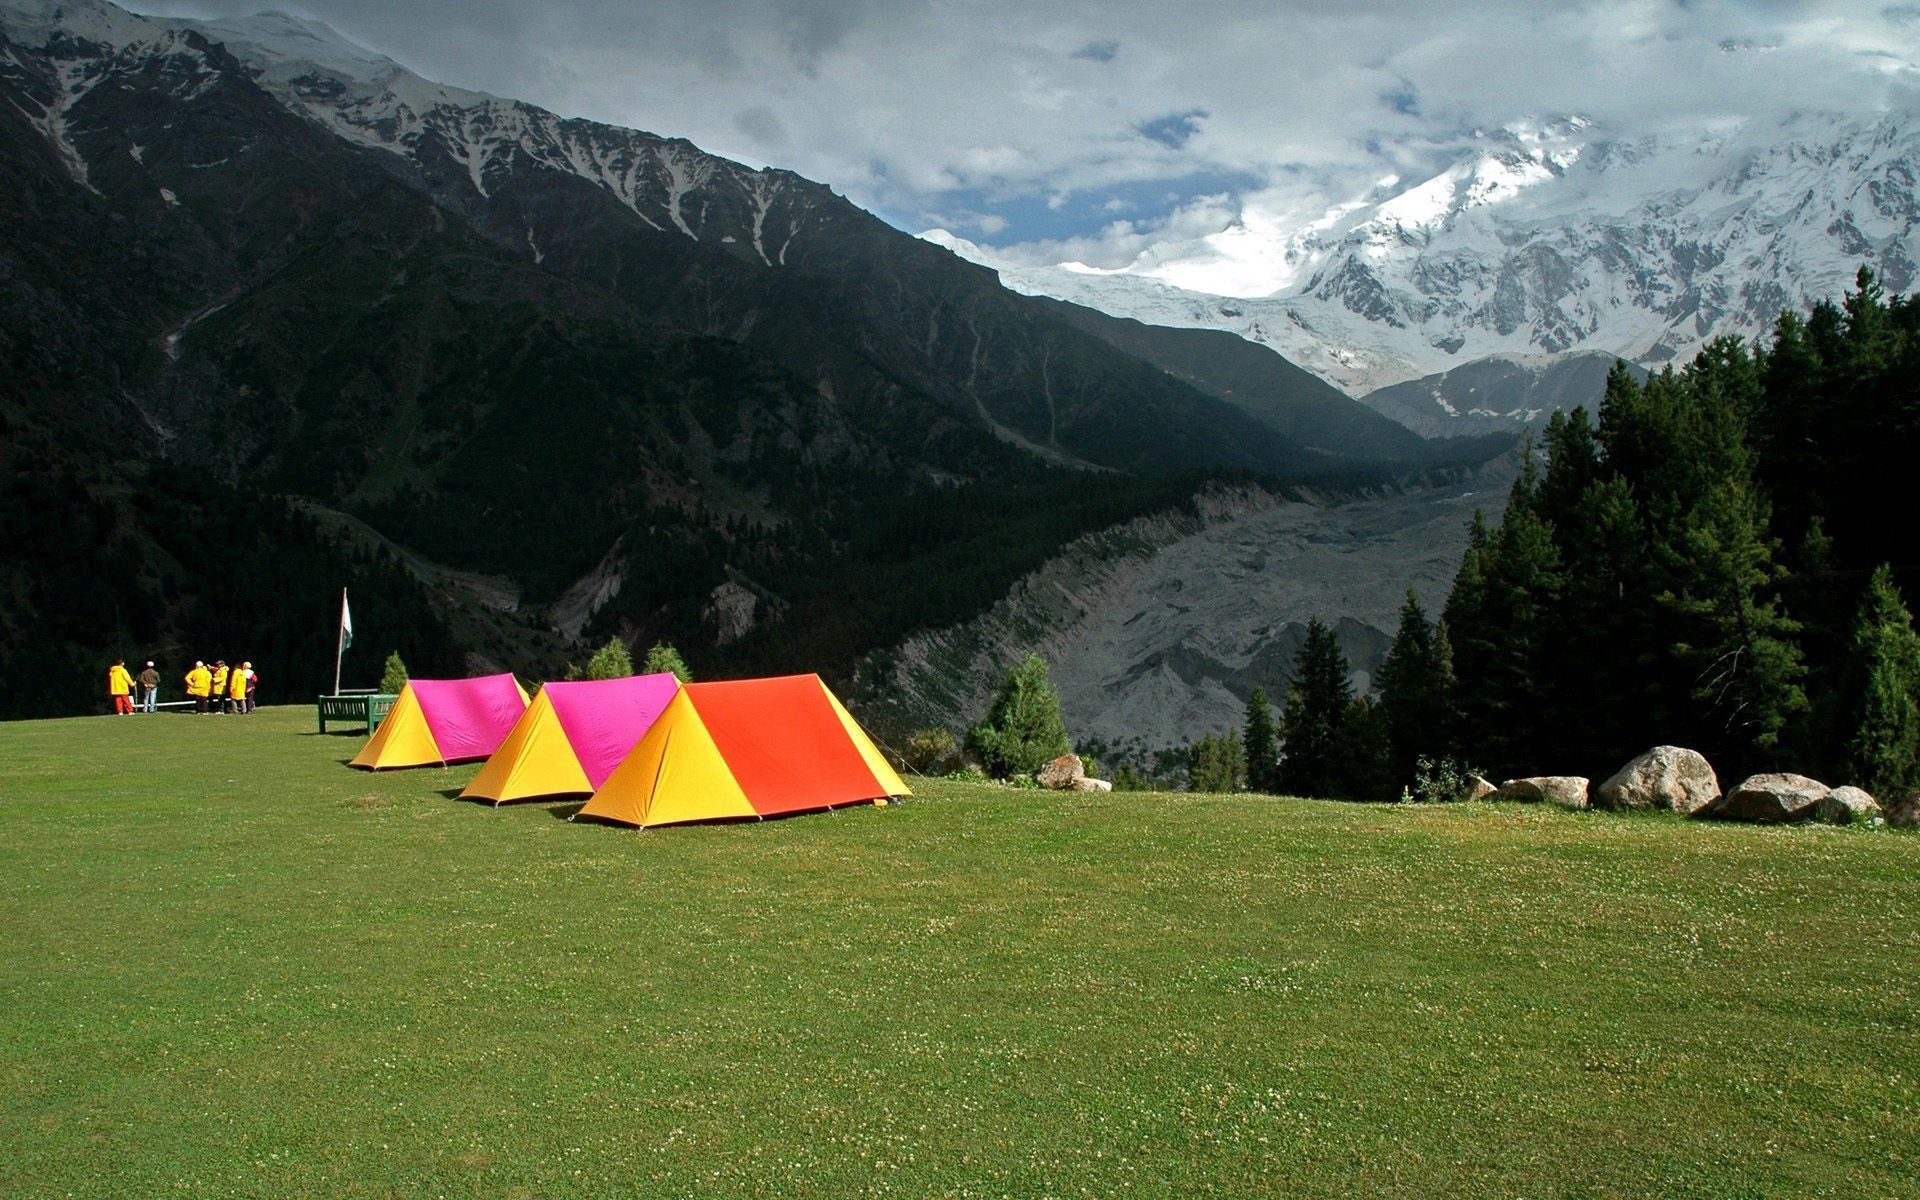 relaxation, bright, glade, nature, climbers, rest, polyana, tents, tourists